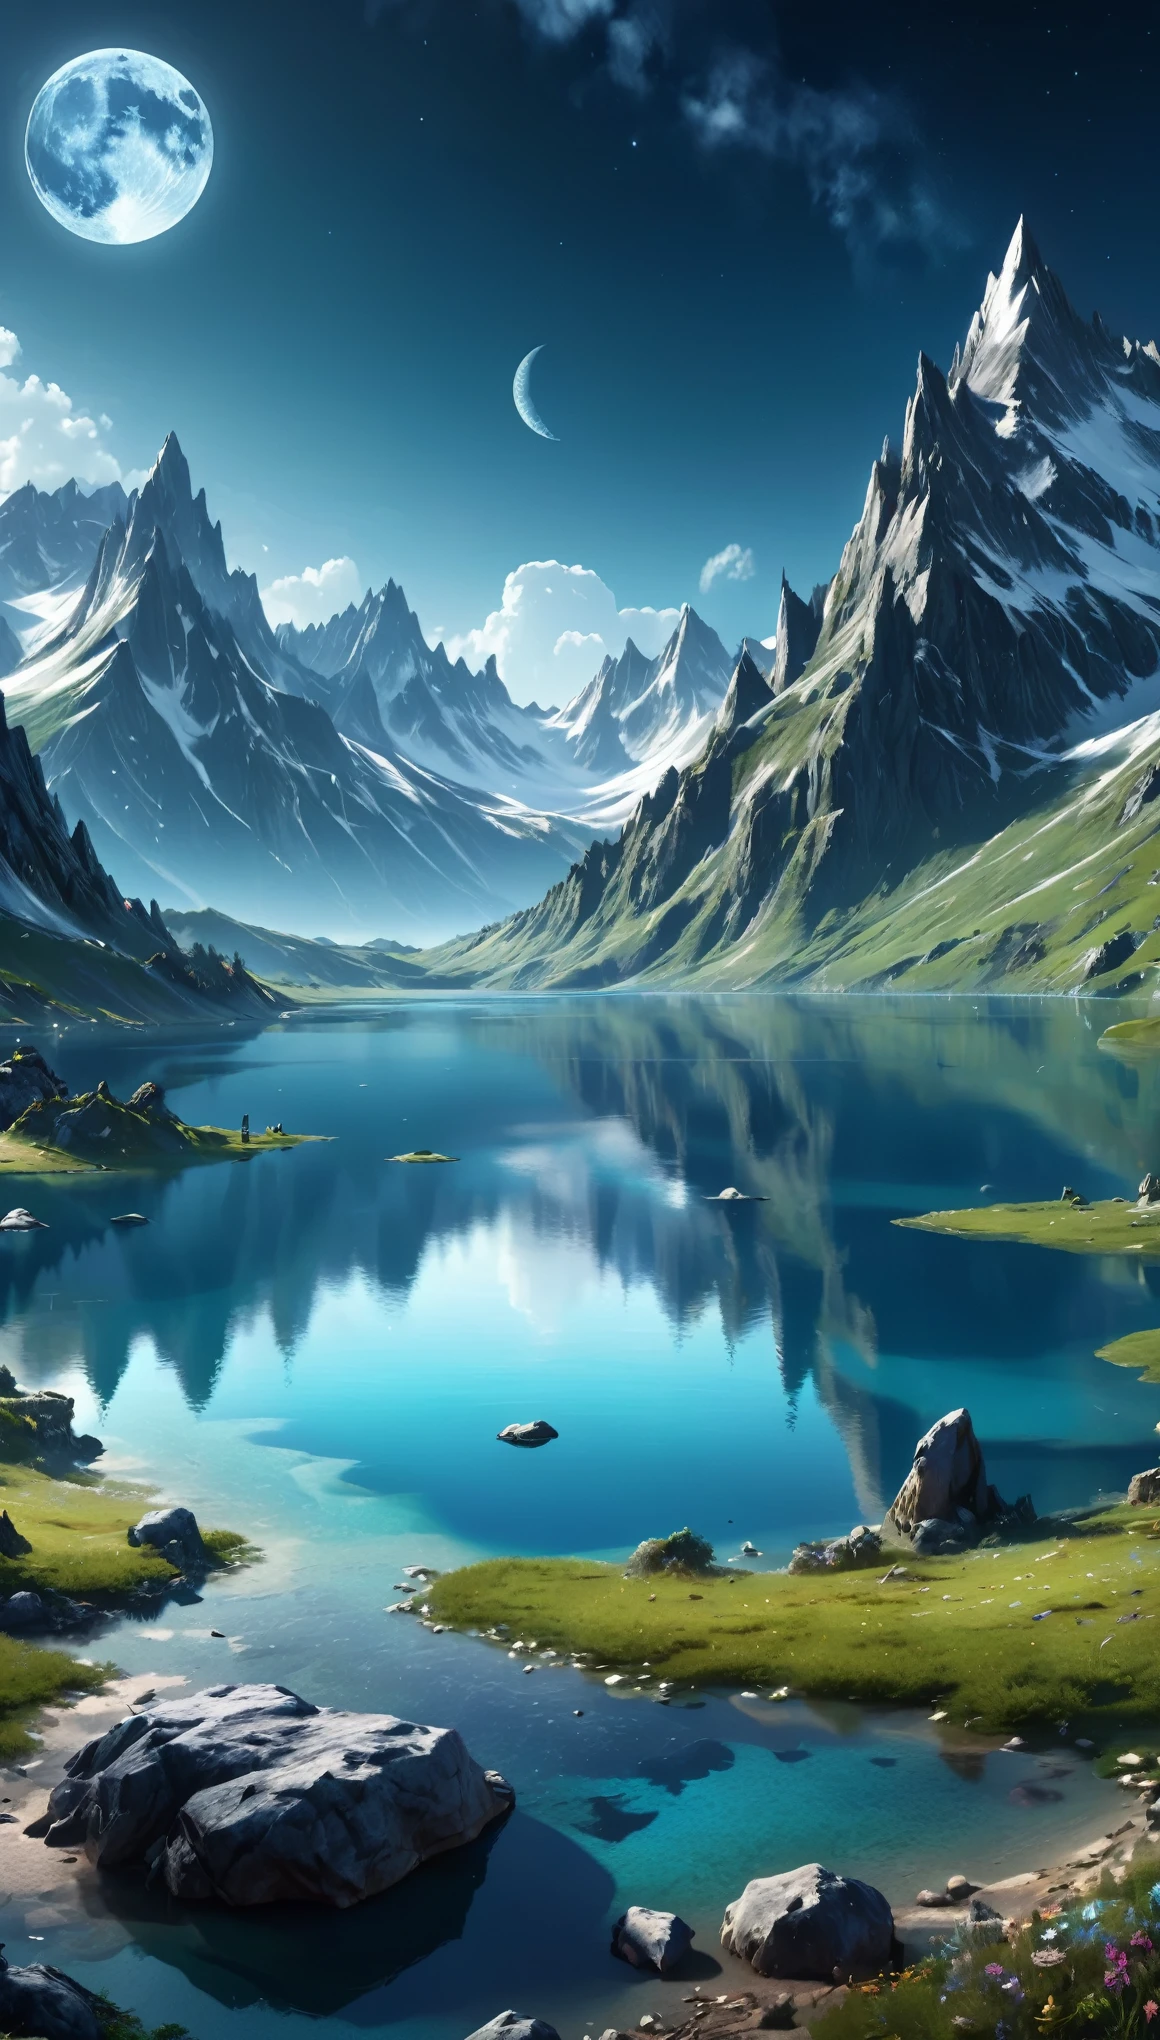 Mountains and lake with moon in the sky、highly detailed digital art in 4K、4K HD Wallpapers Highly detailed and impressive fantasy landscapes、Sci-Fi Fantasy Desktop Wallpaper、Unreal Engine 4K Wallpapers、4K detailed digital art、Sci-Fi Fantasy Wallpaper、Spectacular dreamy fantasy landscape、4K HD Matte Digital Painting、Stunning artwork in 8k